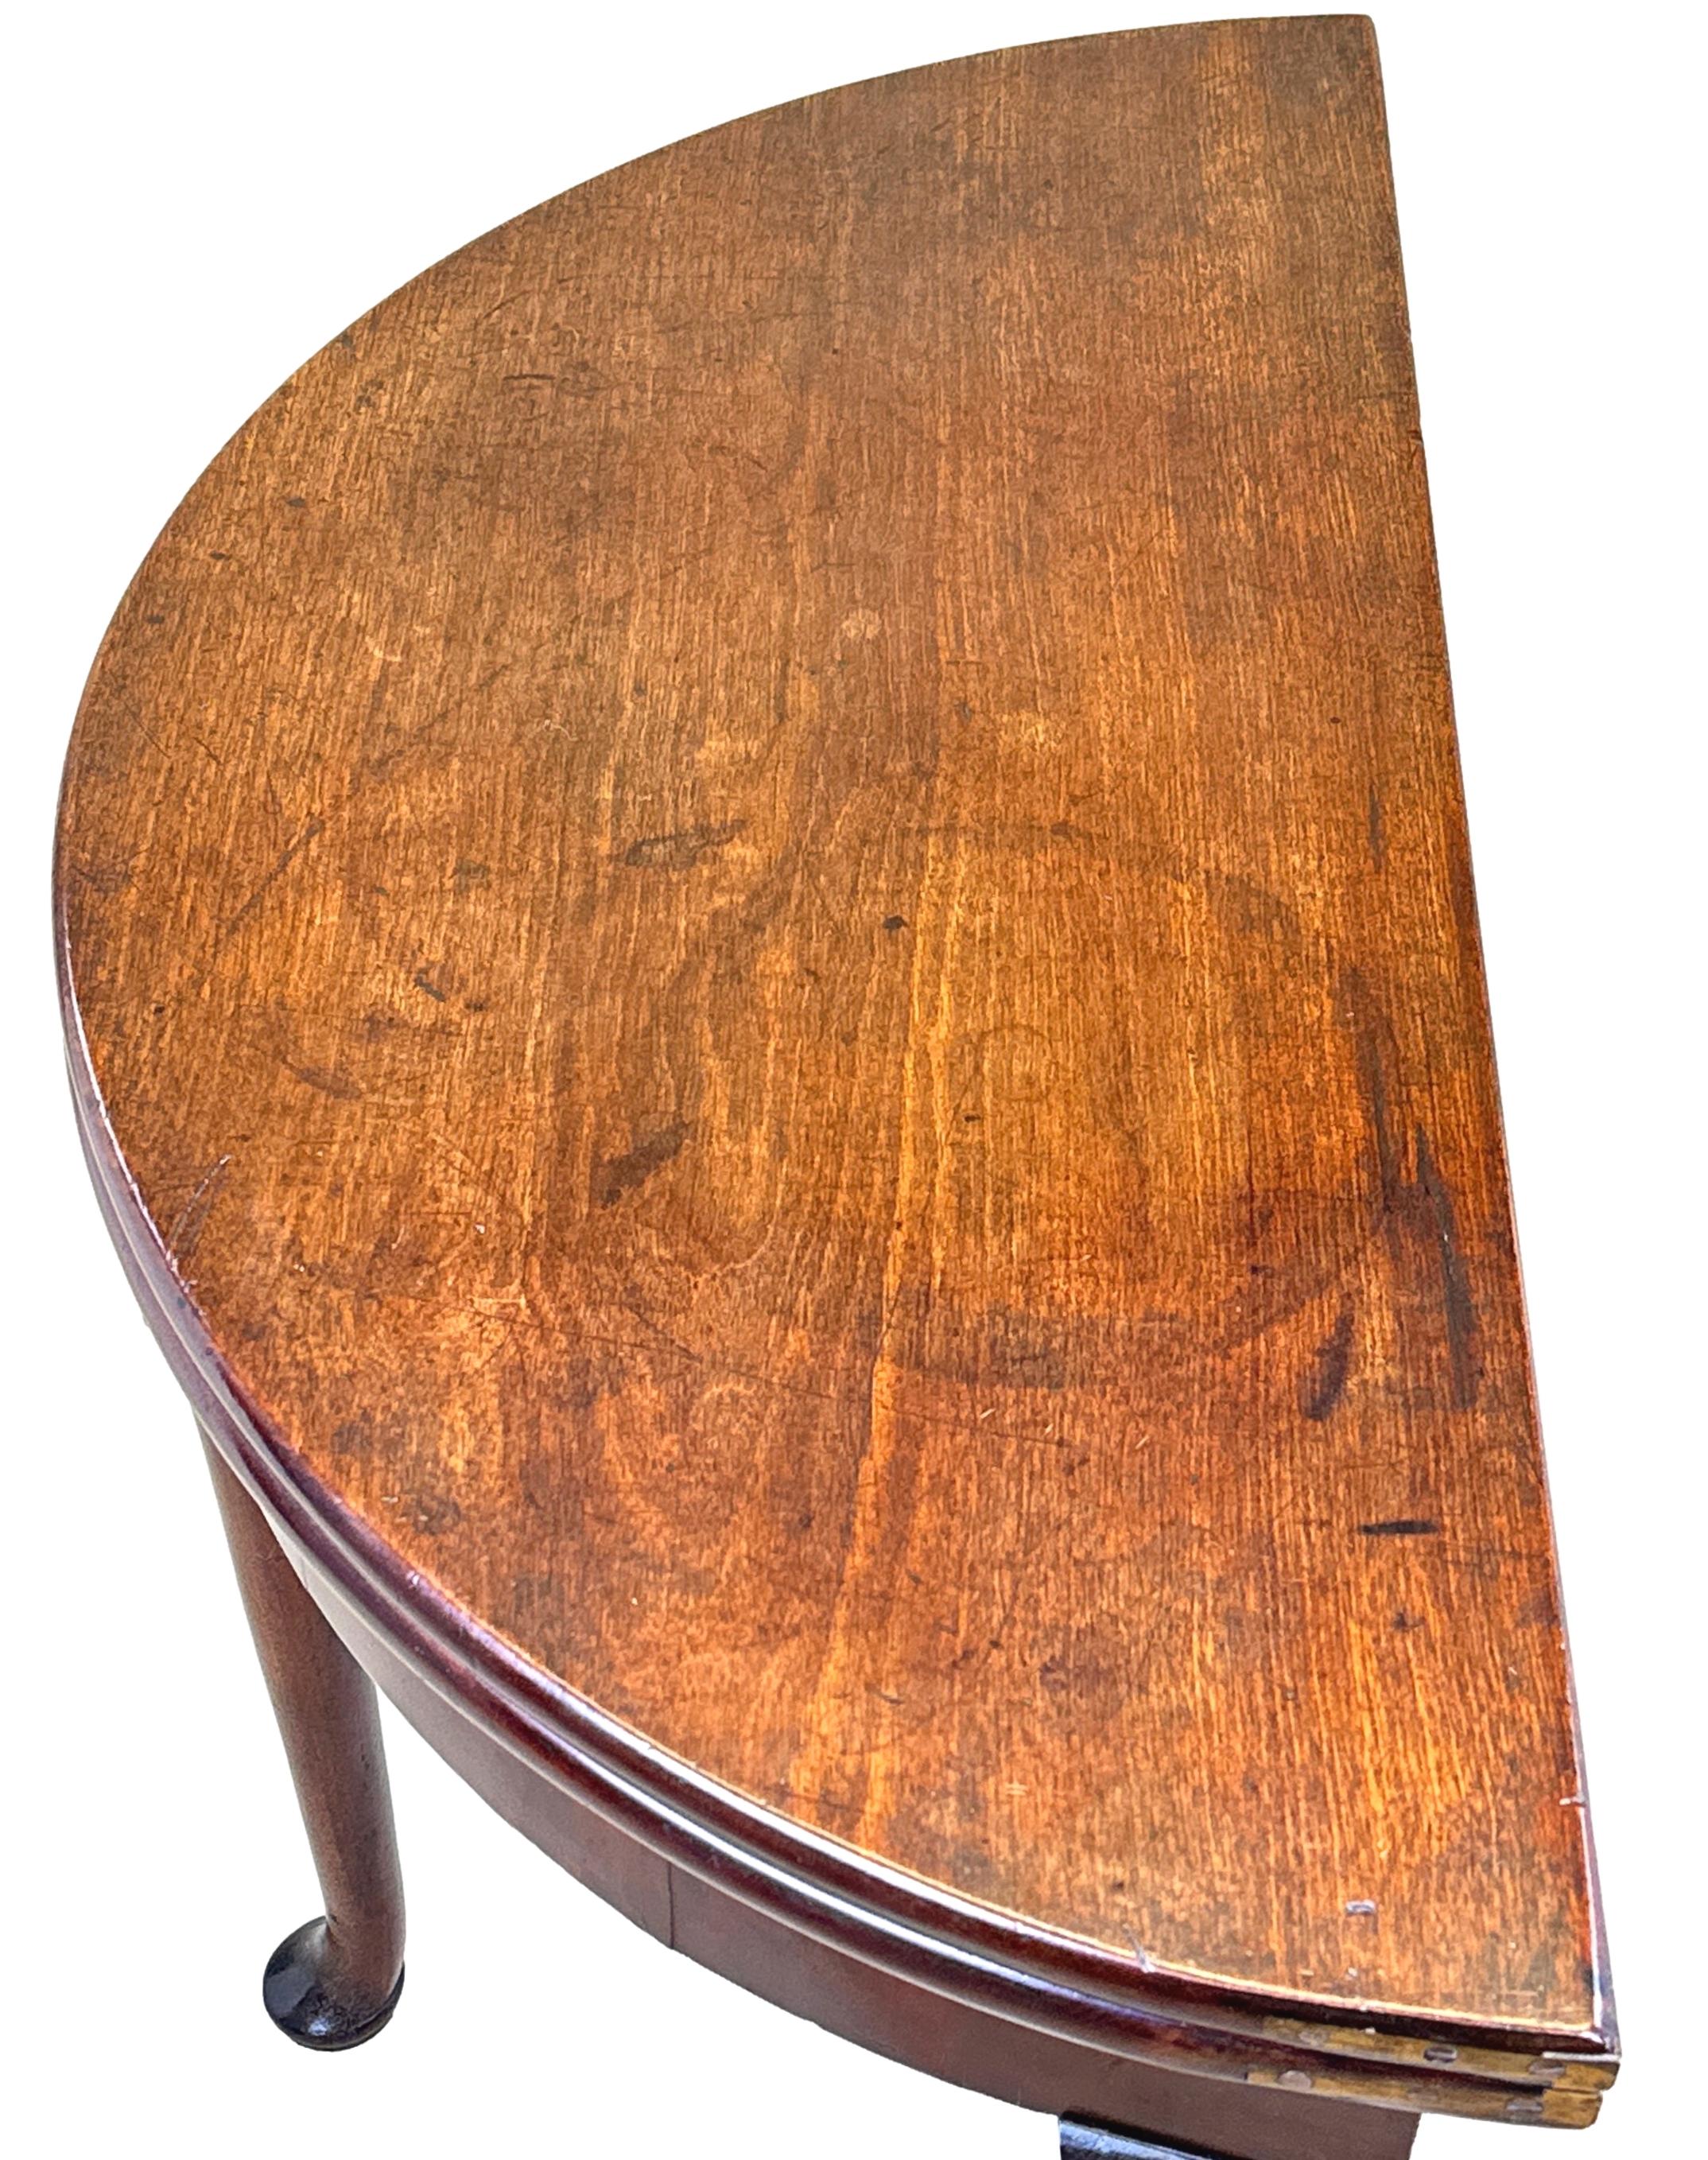 A very good quality, early 18th century, George II Period Mahogany Demi Lune tea table, of exceptional untouched colour and patina throughout, having well figured foldover top, enclosing storage well, raised on elegant cabriole legs with carved